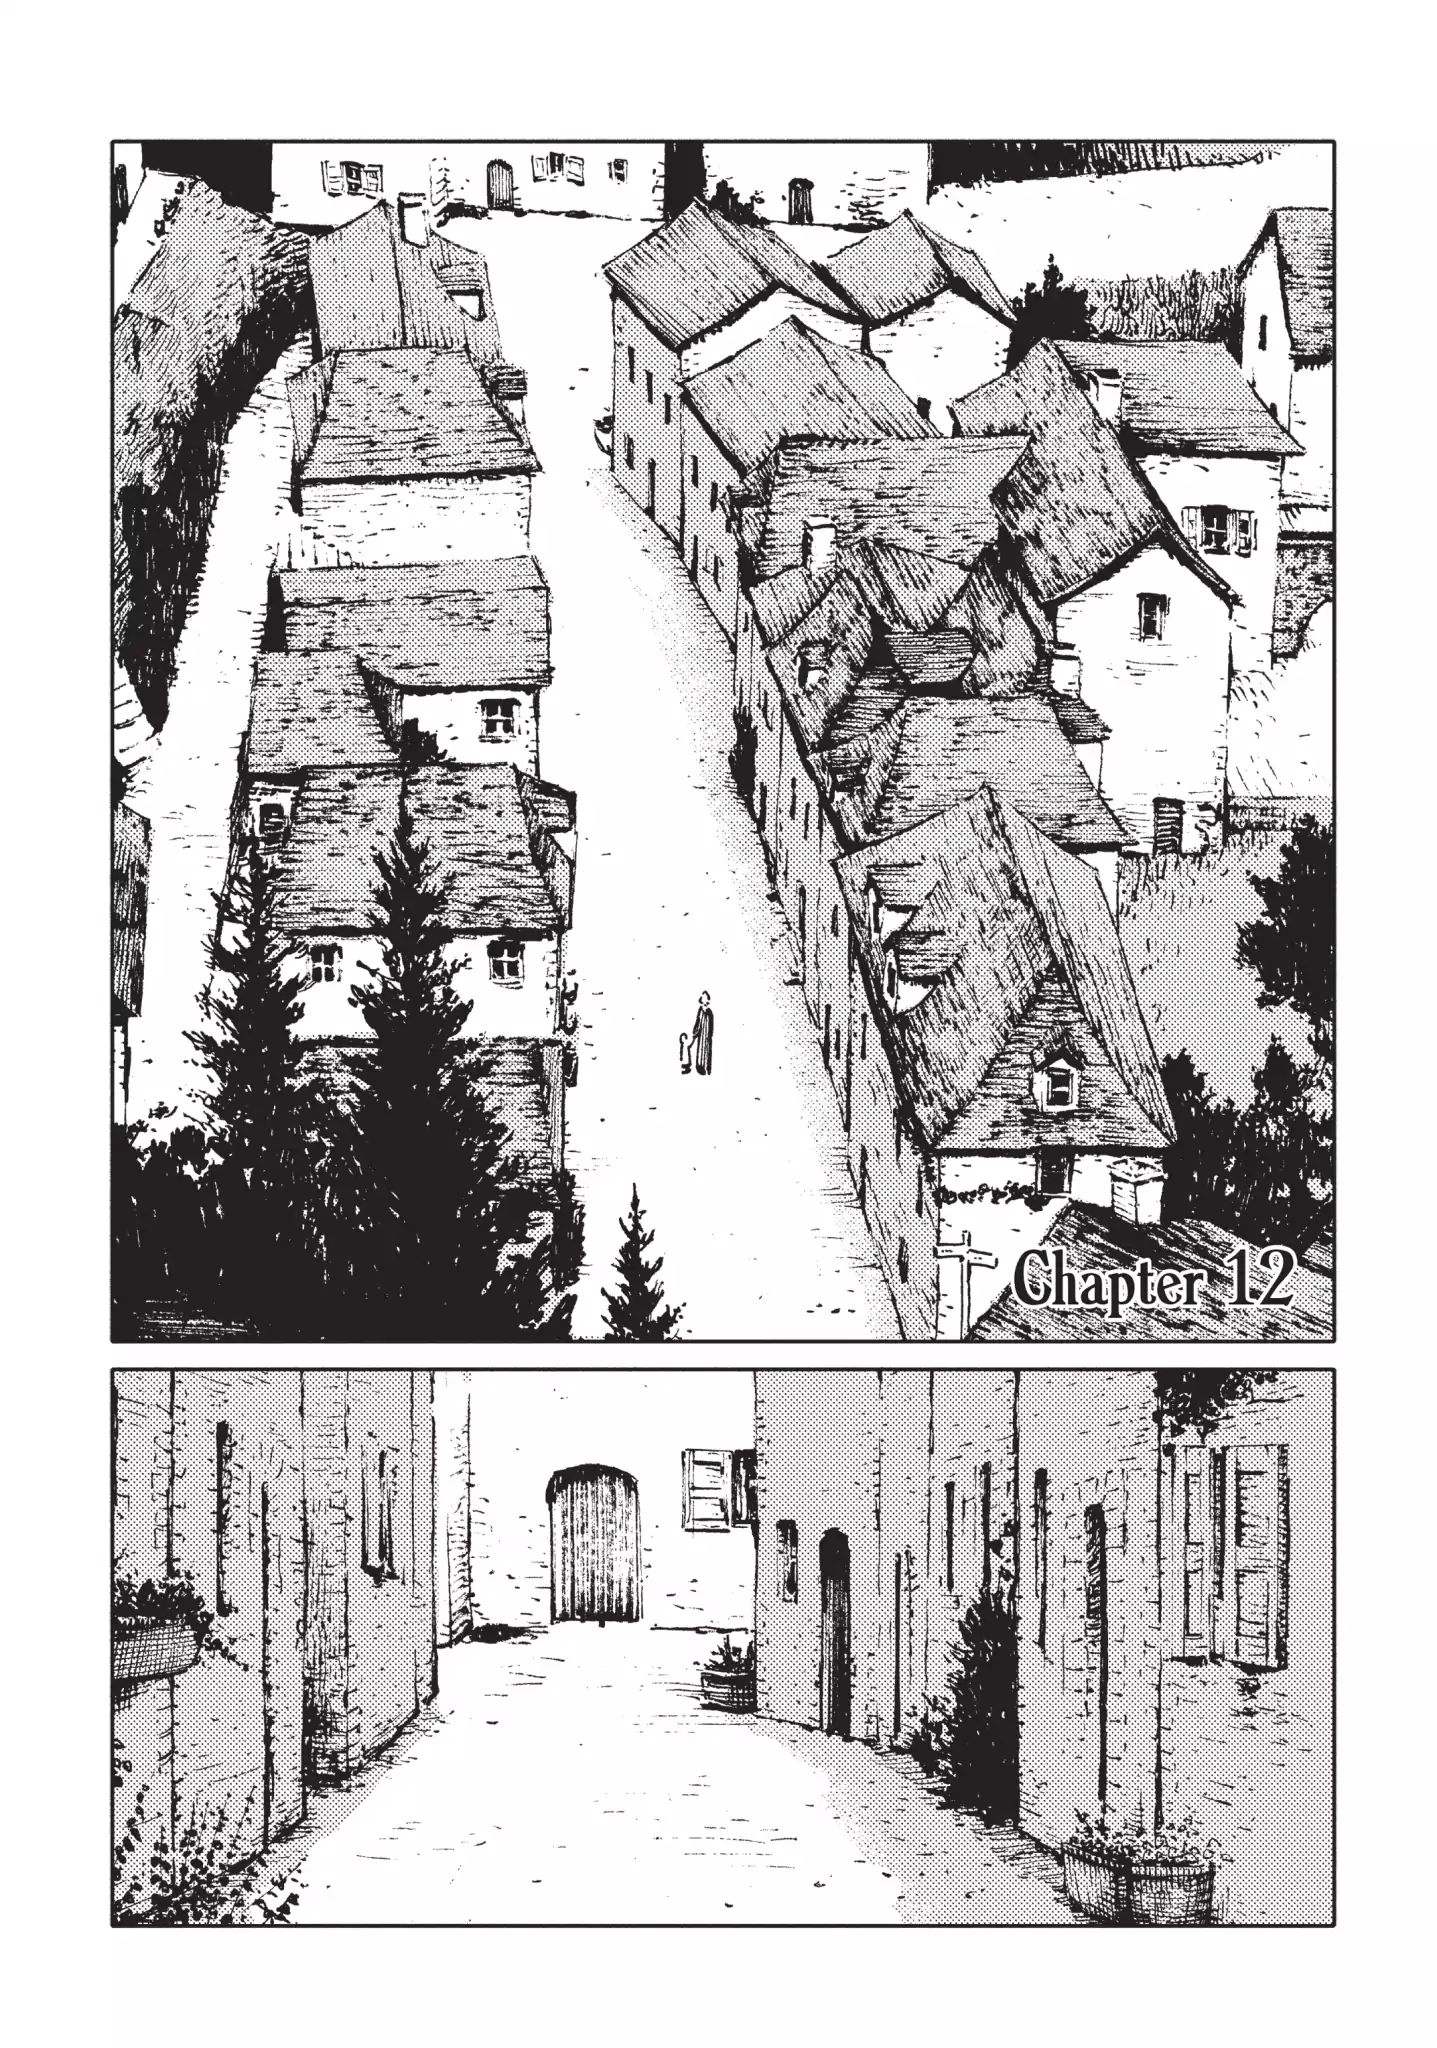 The Girl From The Other Side: Siúil, A Rún - Page 2